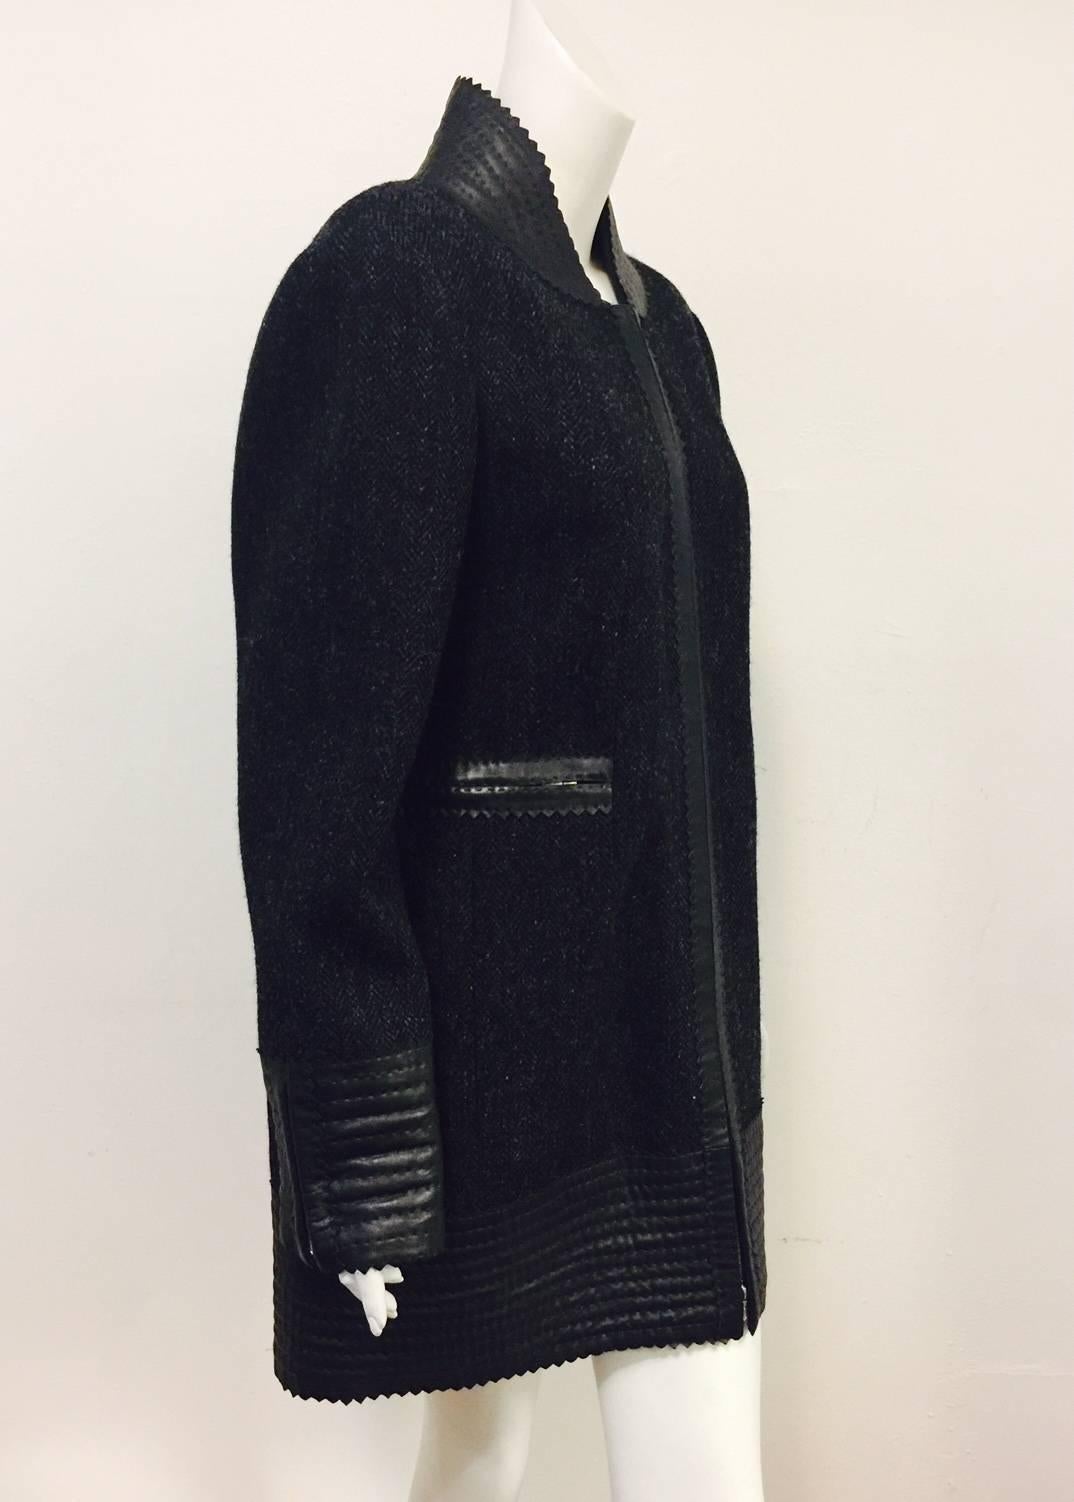 Chanel Black and Grey Herringbone Tweed Coat is modern, chic, with just the right amount of "edge"!   Features somewhat futuristic design and silhouette finished with zig zag finished, channel quilted lambskin deep hem, cuffs, and standup